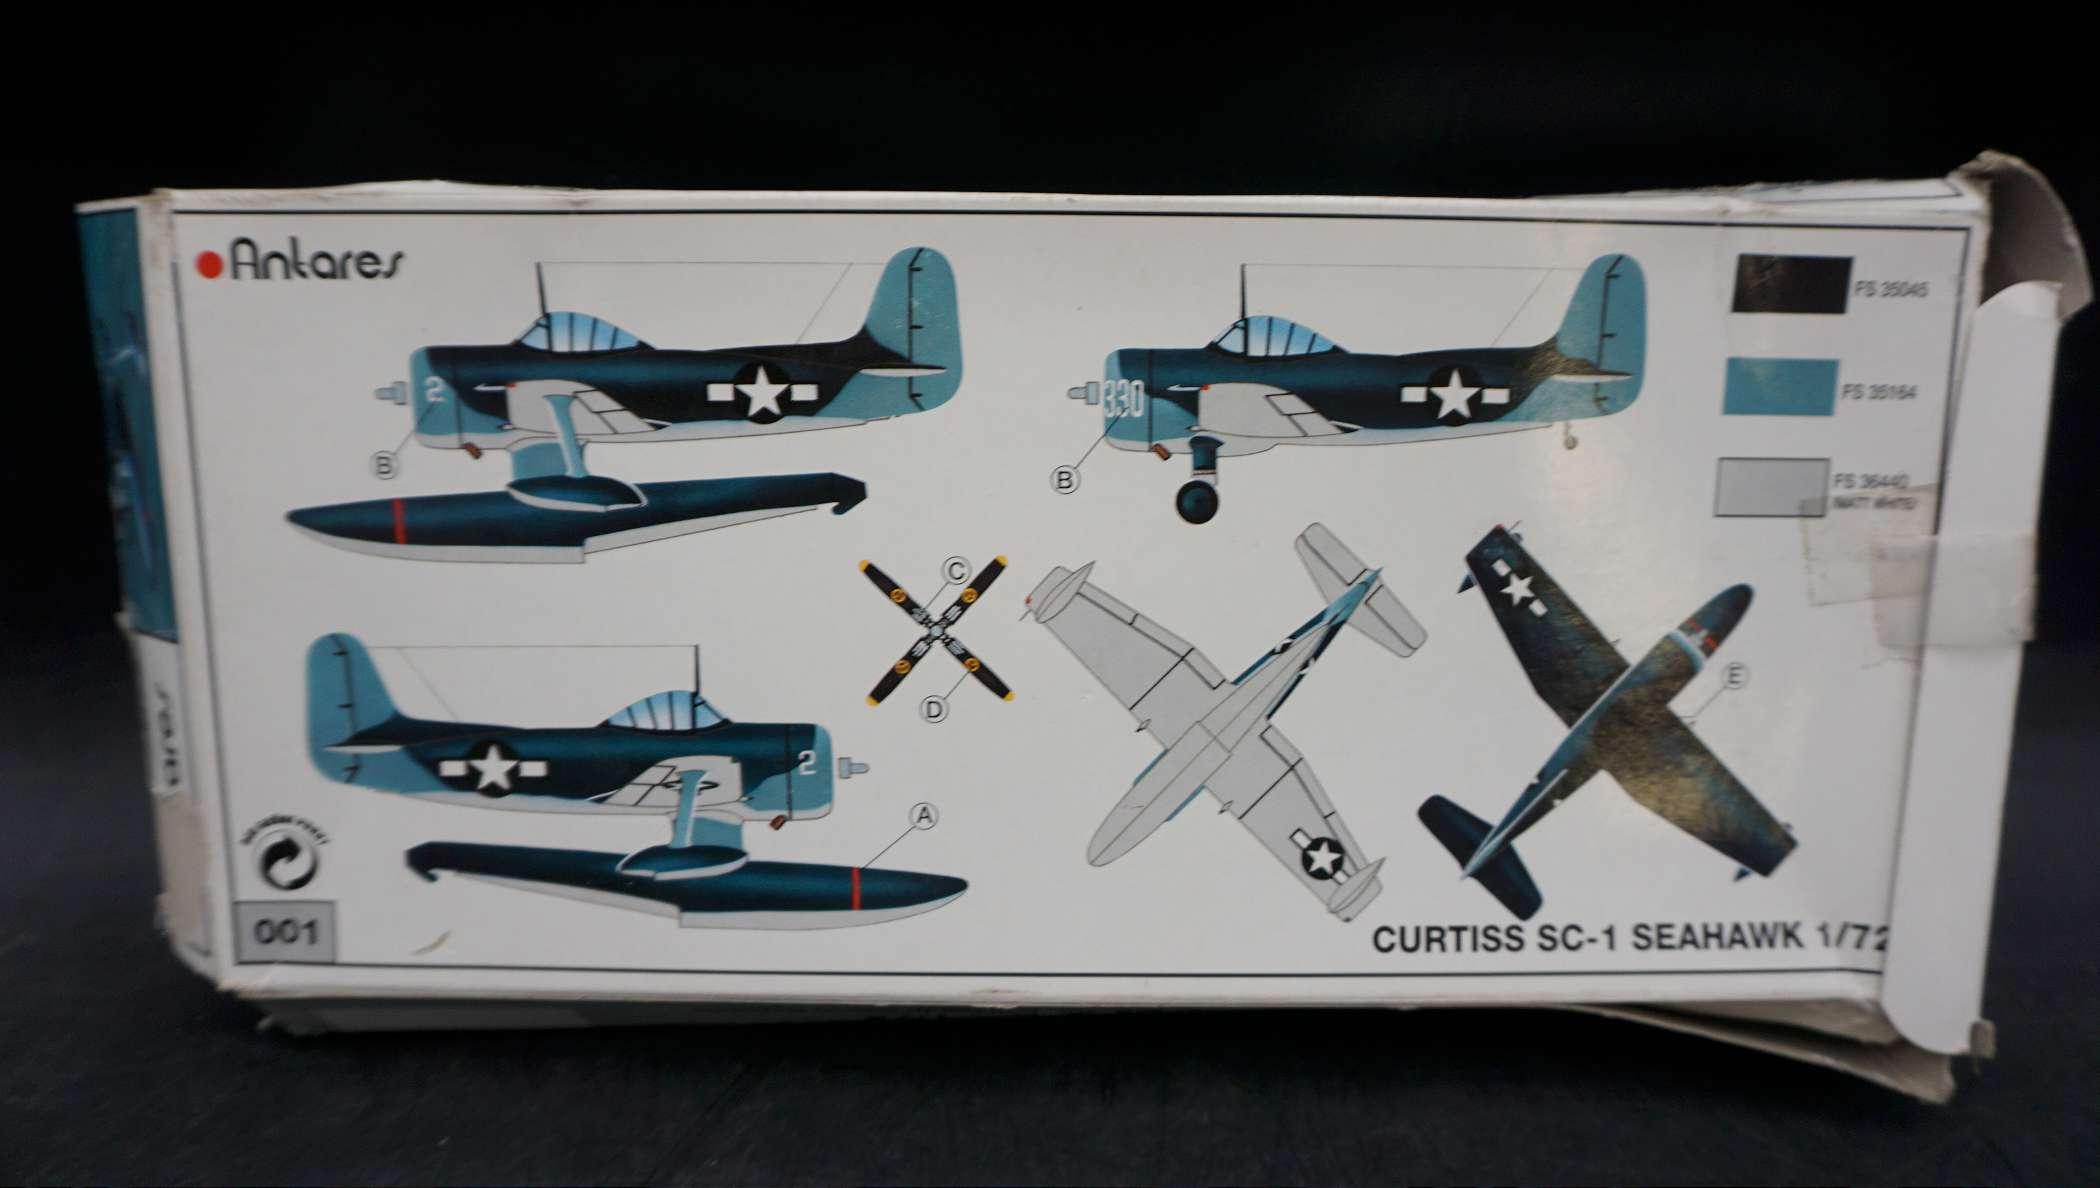 Anlares Curtiss Sc-1 Seahawk 1:72 Injection Molded Kit